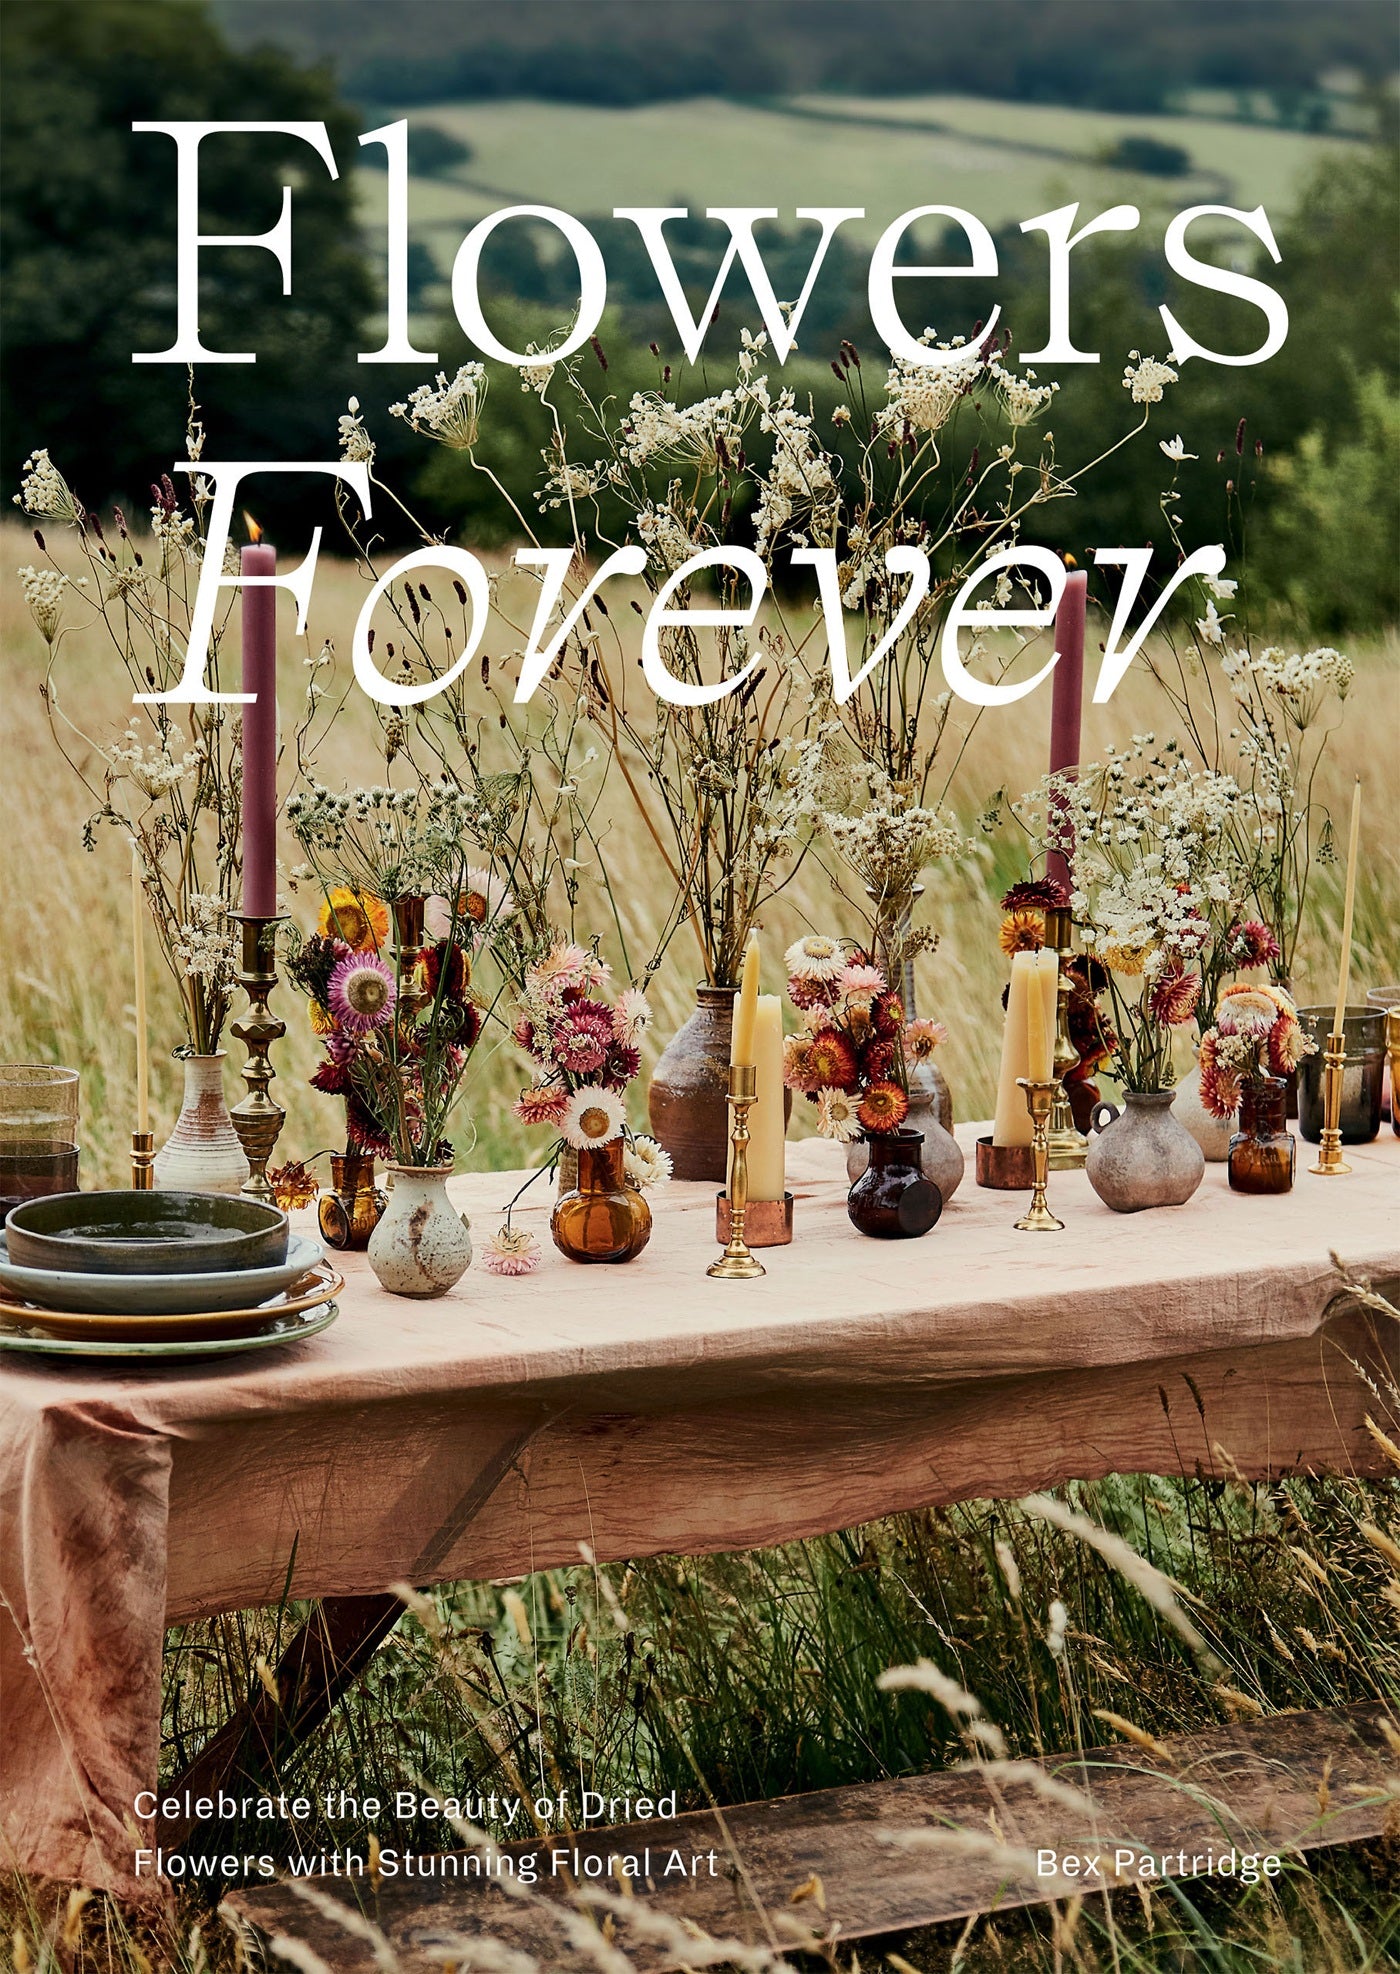 FLOWERS FOREVER: SUSTAINABLE DRIED FLOWERS, THE ARTISTS WAY